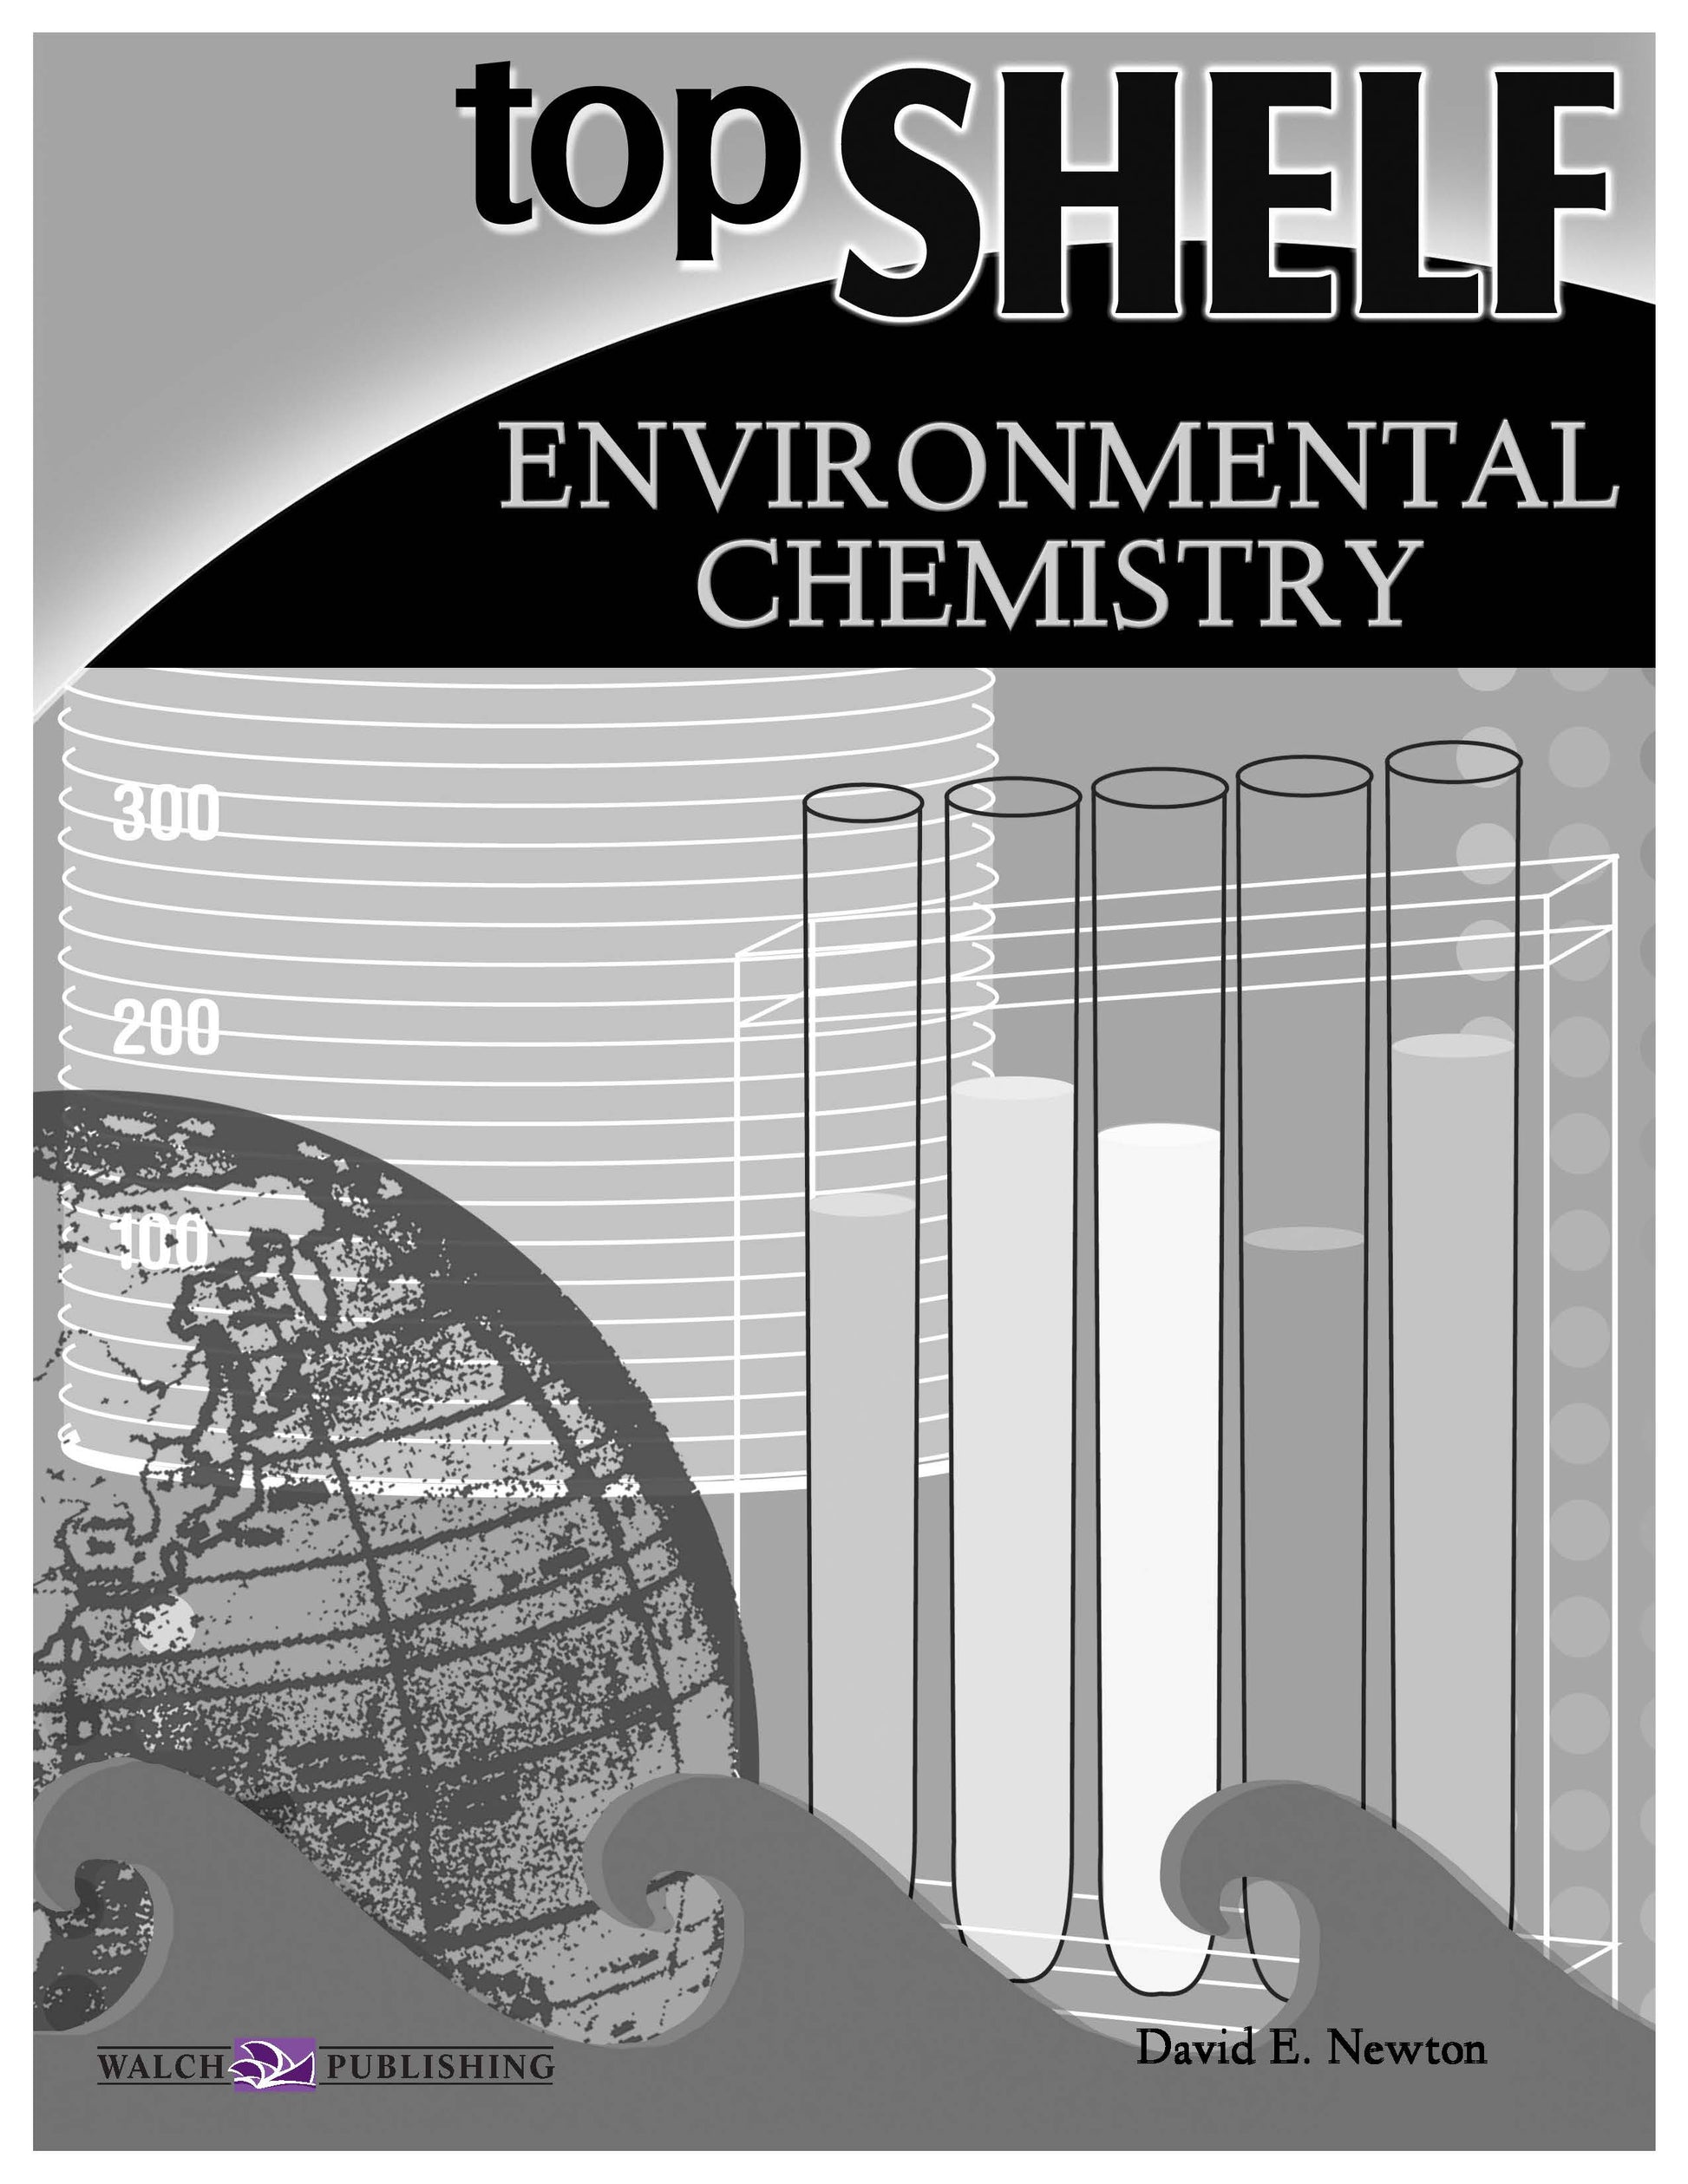 Environmental Chemistry, Chemistry principles, Pollution exploration, Environmental impact, Standardised test preparation, STEM classes, Science teachers, Geography teachers, Humanities teachers, Educational resources, Classroom learning, Chemistry education, Curriculum enrichment